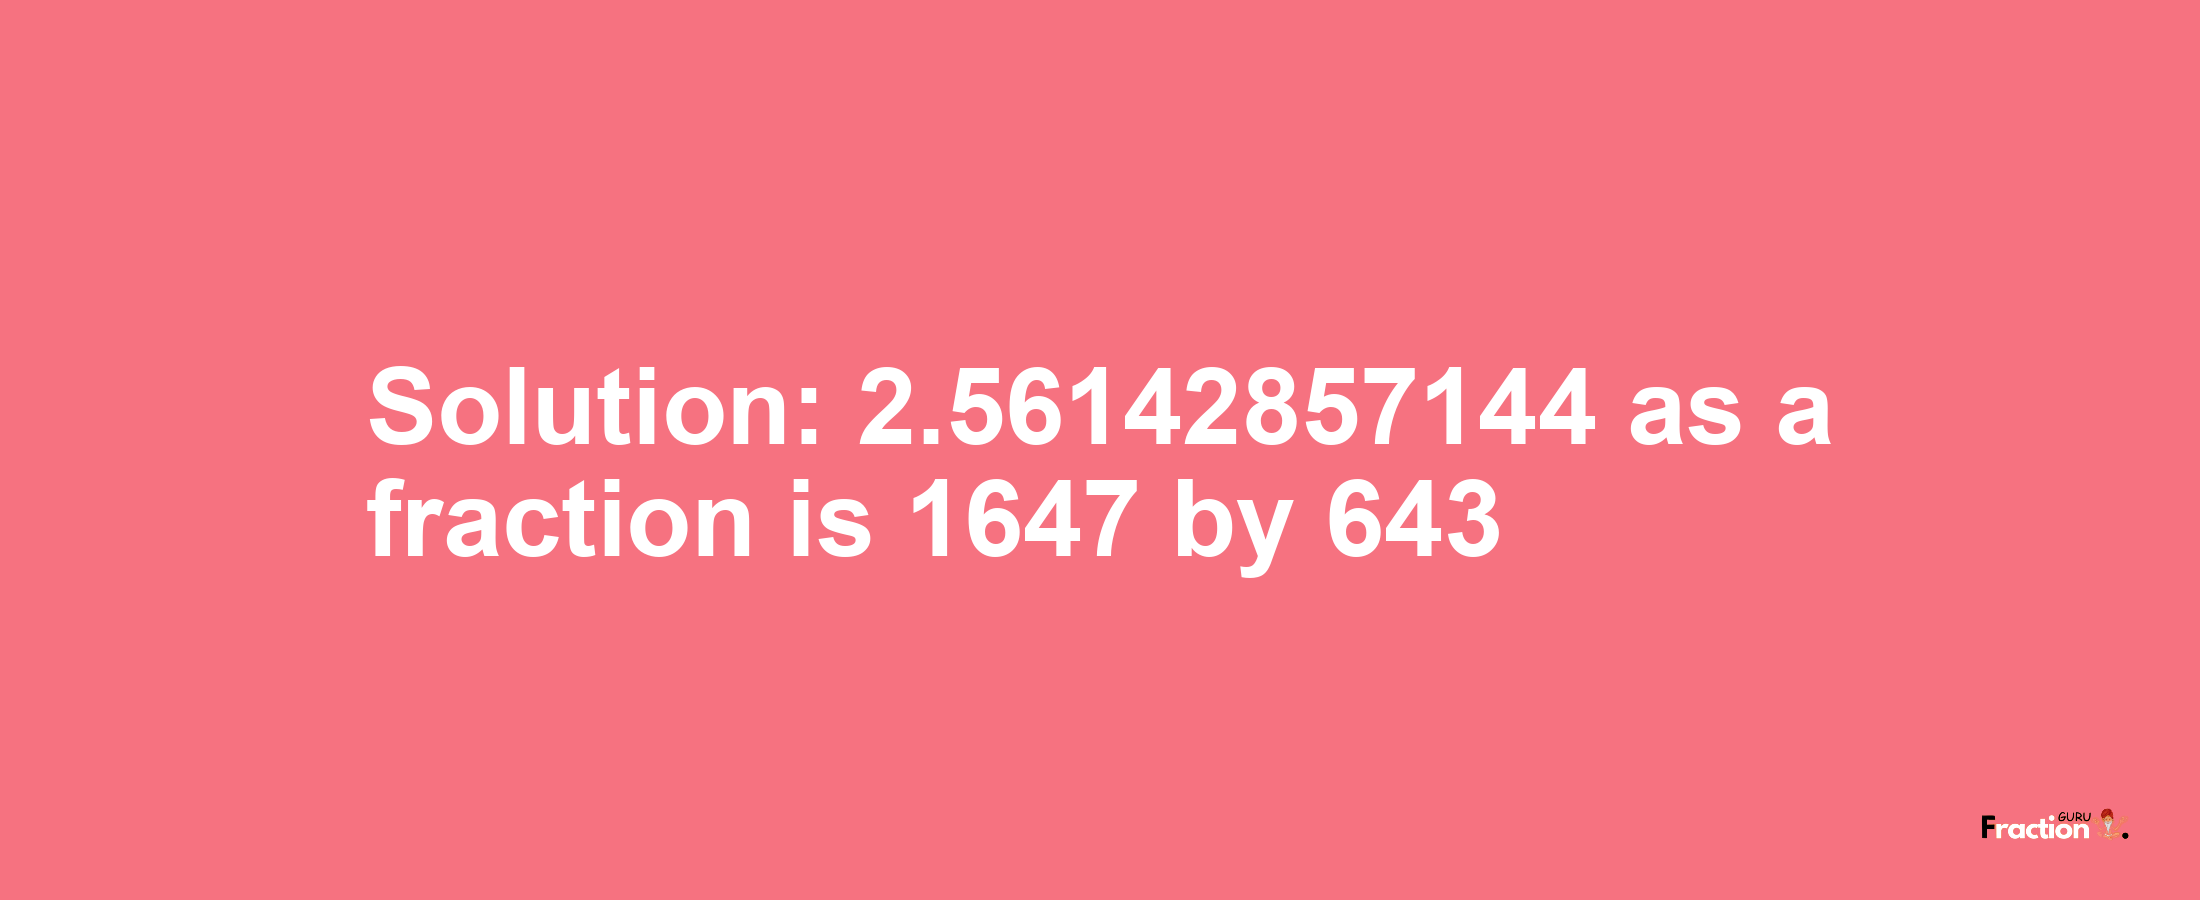 Solution:2.56142857144 as a fraction is 1647/643